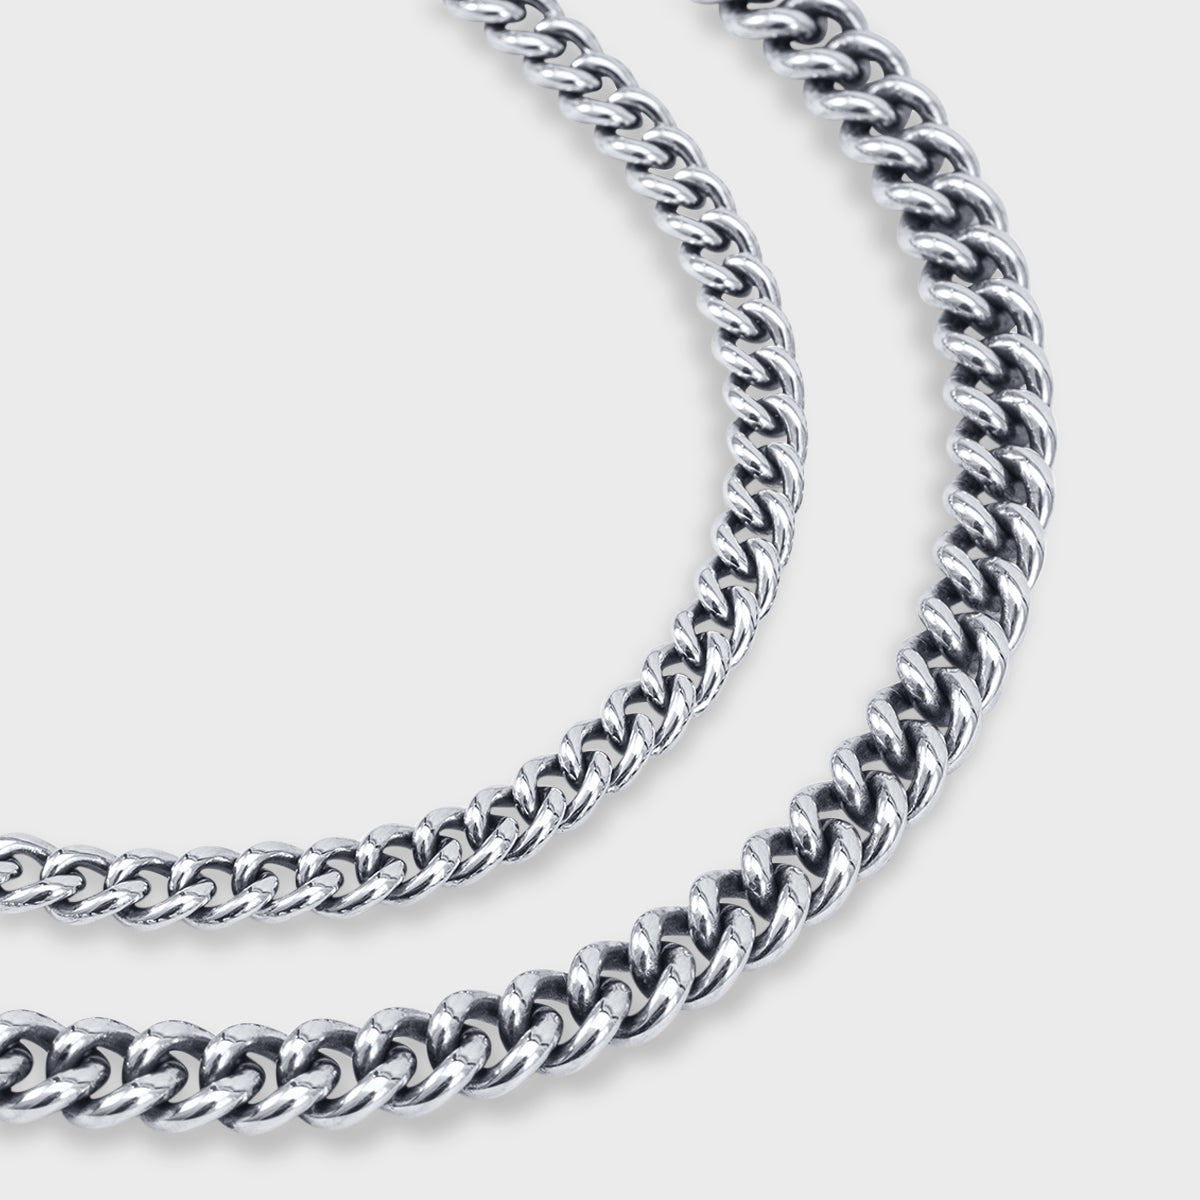 Curb Chain Necklace - A 24